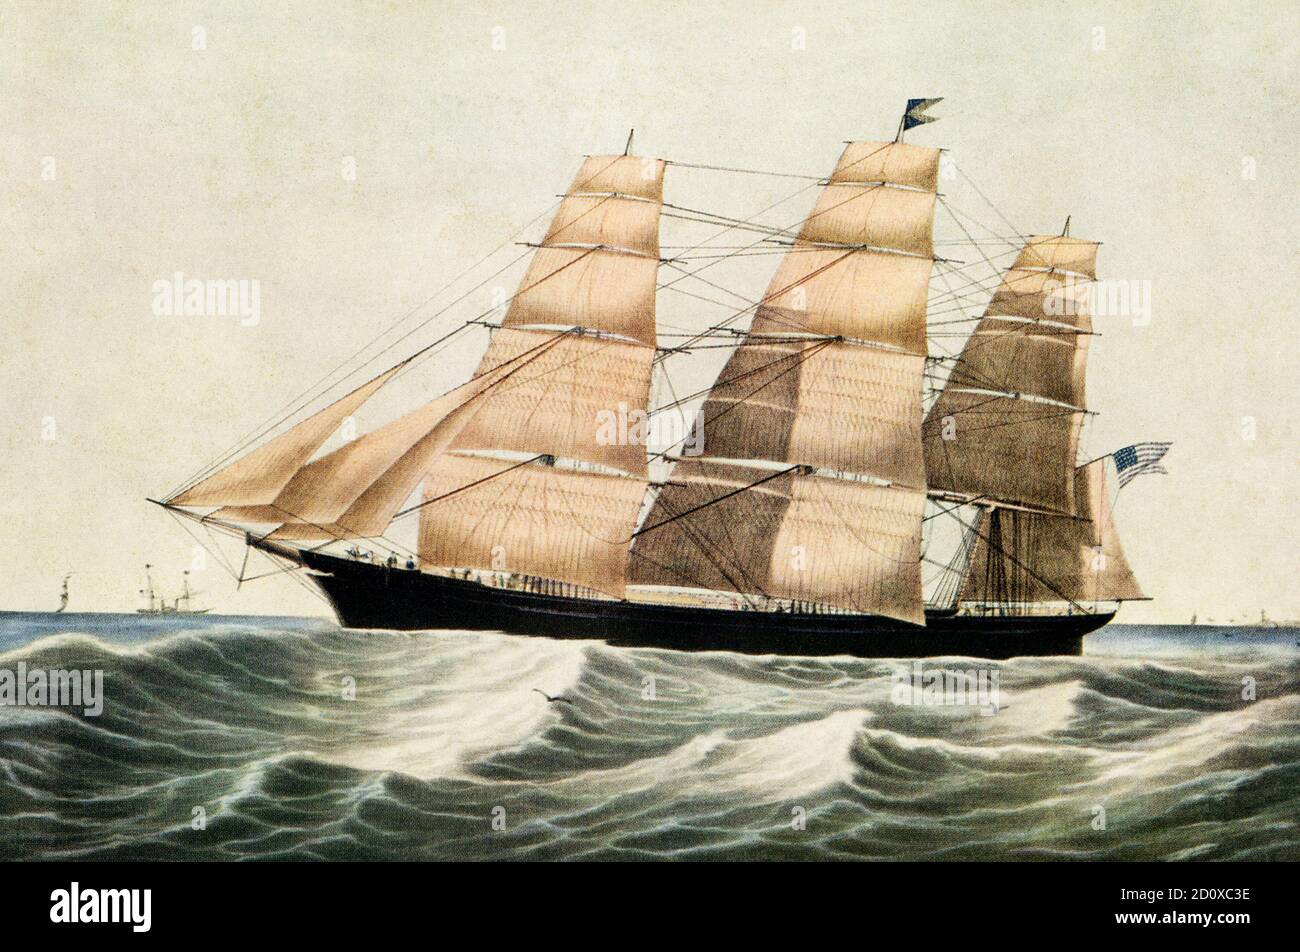 Clipper Ship 'Sovereign of the Seas' E Brown Jr del N Currier 1852.  Sovereign of the Seas, a clipper ship built in 1852, was a sailing vessel notable for setting the world record for fastest sailing ship—22 knots. Stock Photo